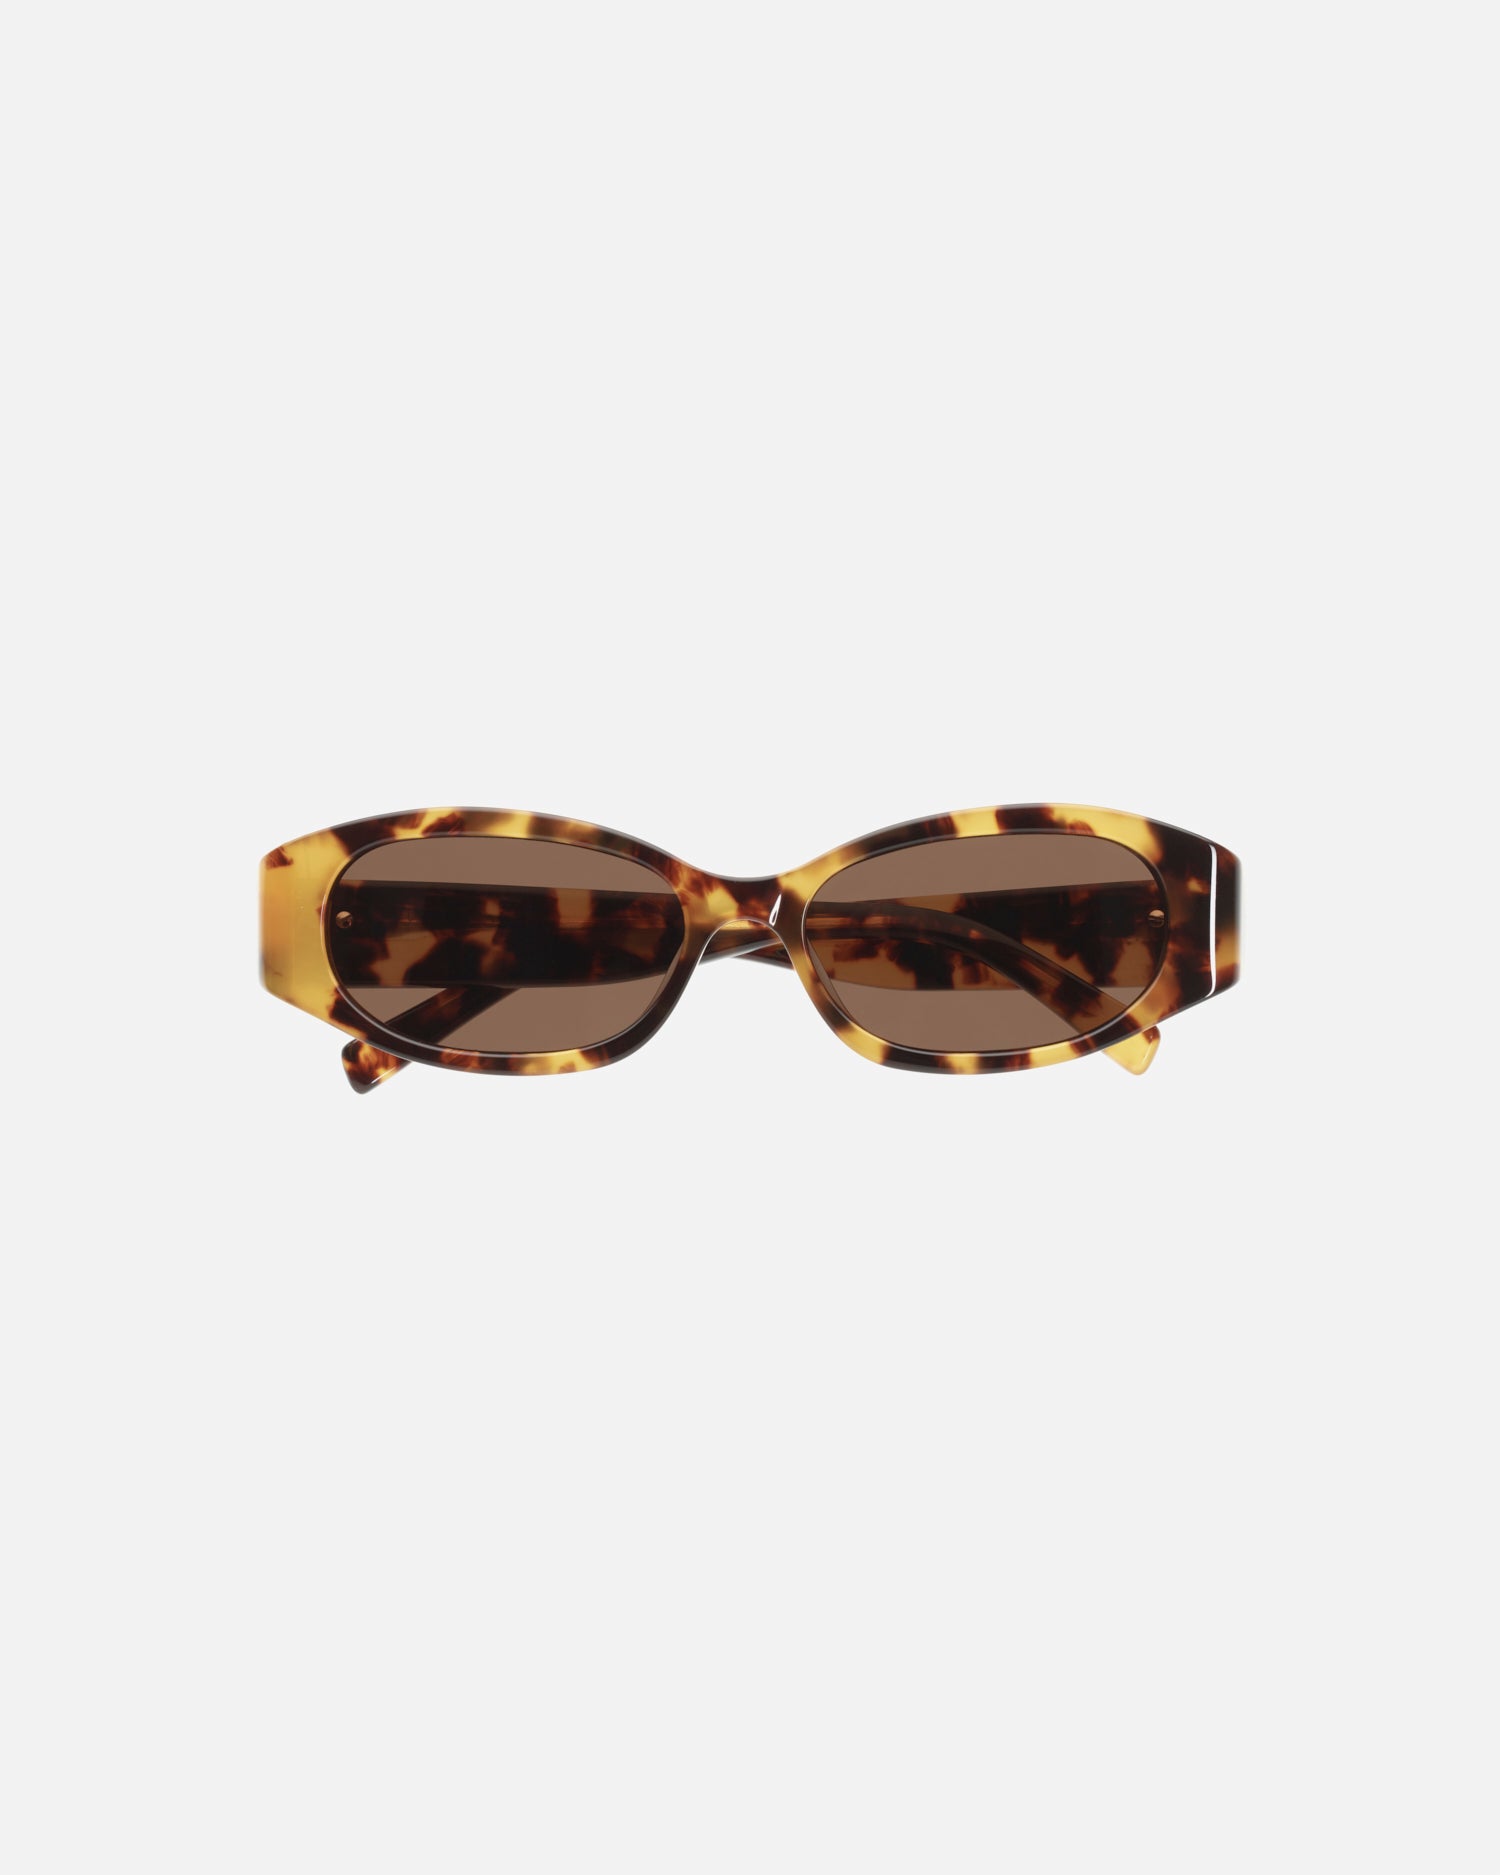 Momentum luxe sunglasses by Velvet Canyon in Eco Tort